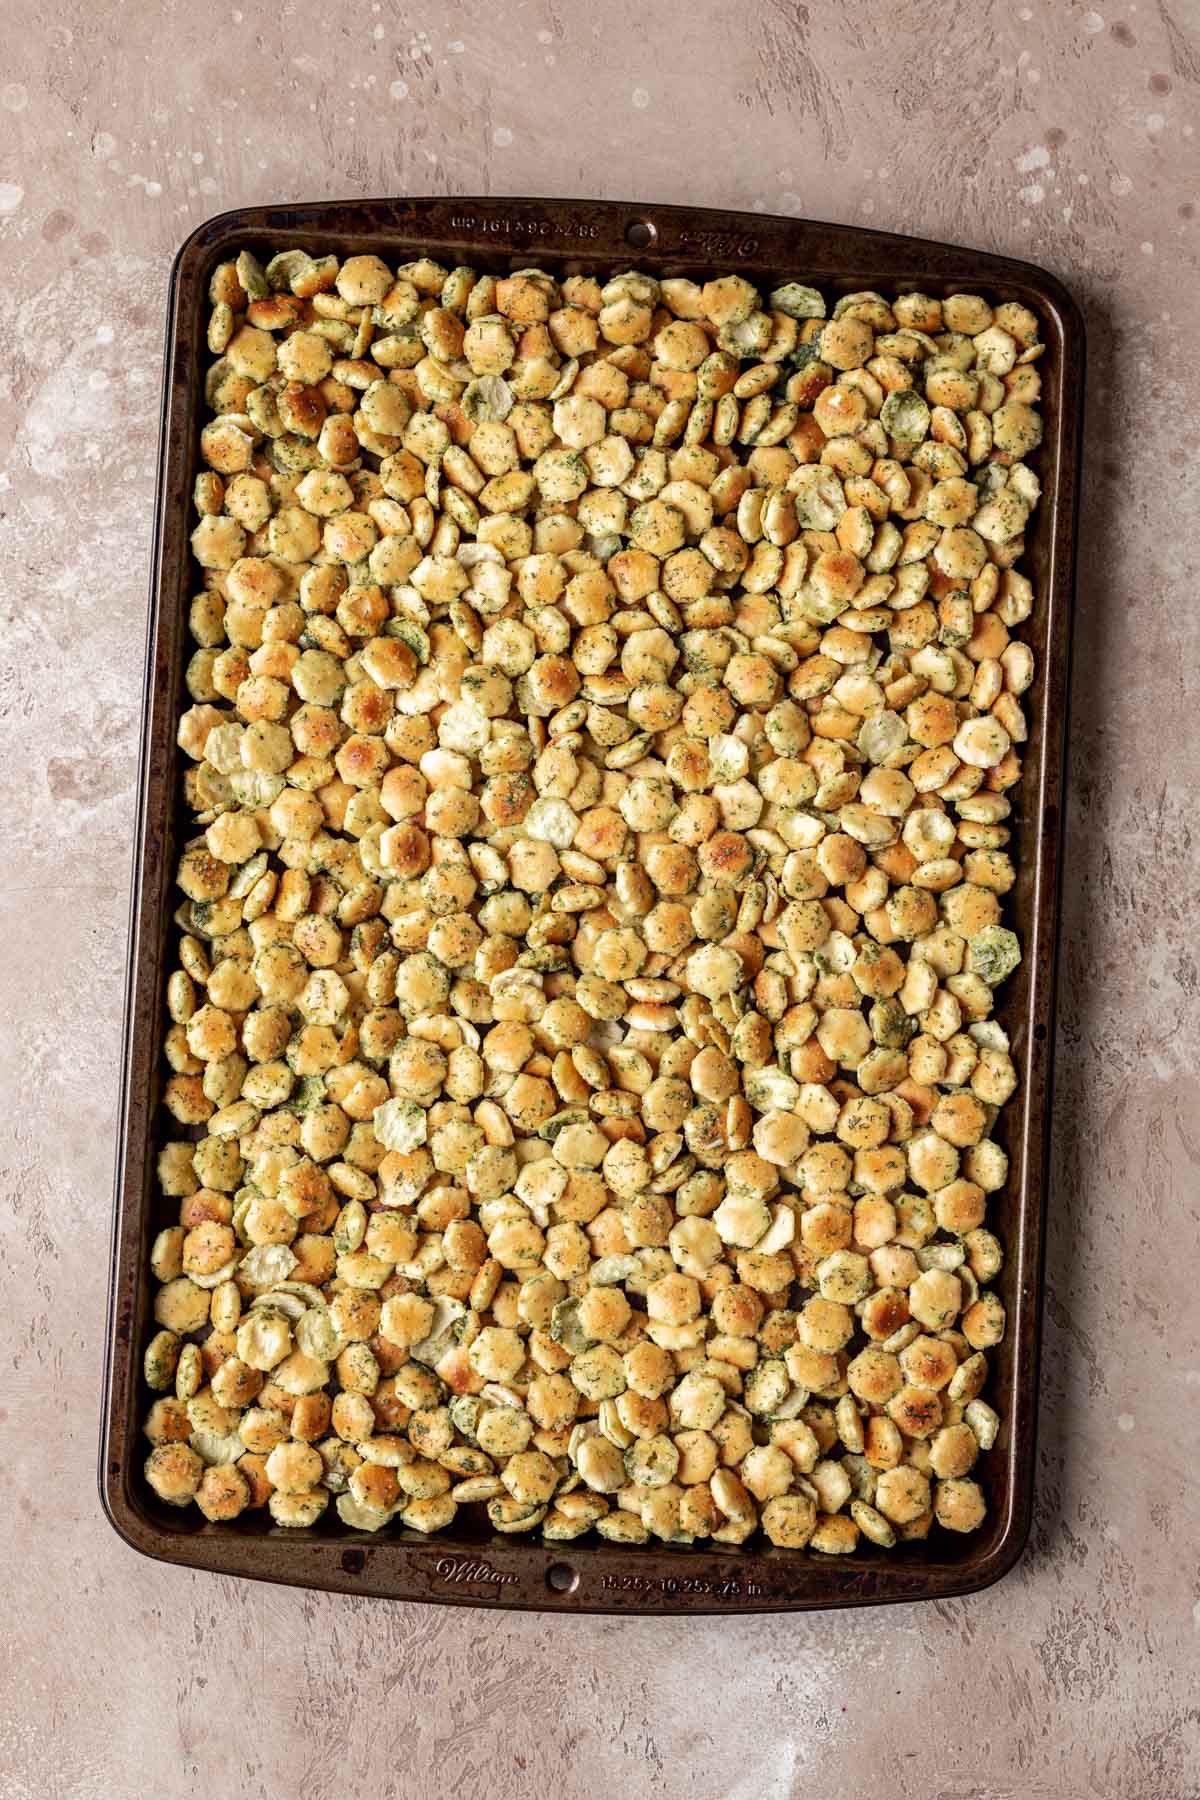 Ranch Oyster Crackers seasoned before baking on a baking sheet